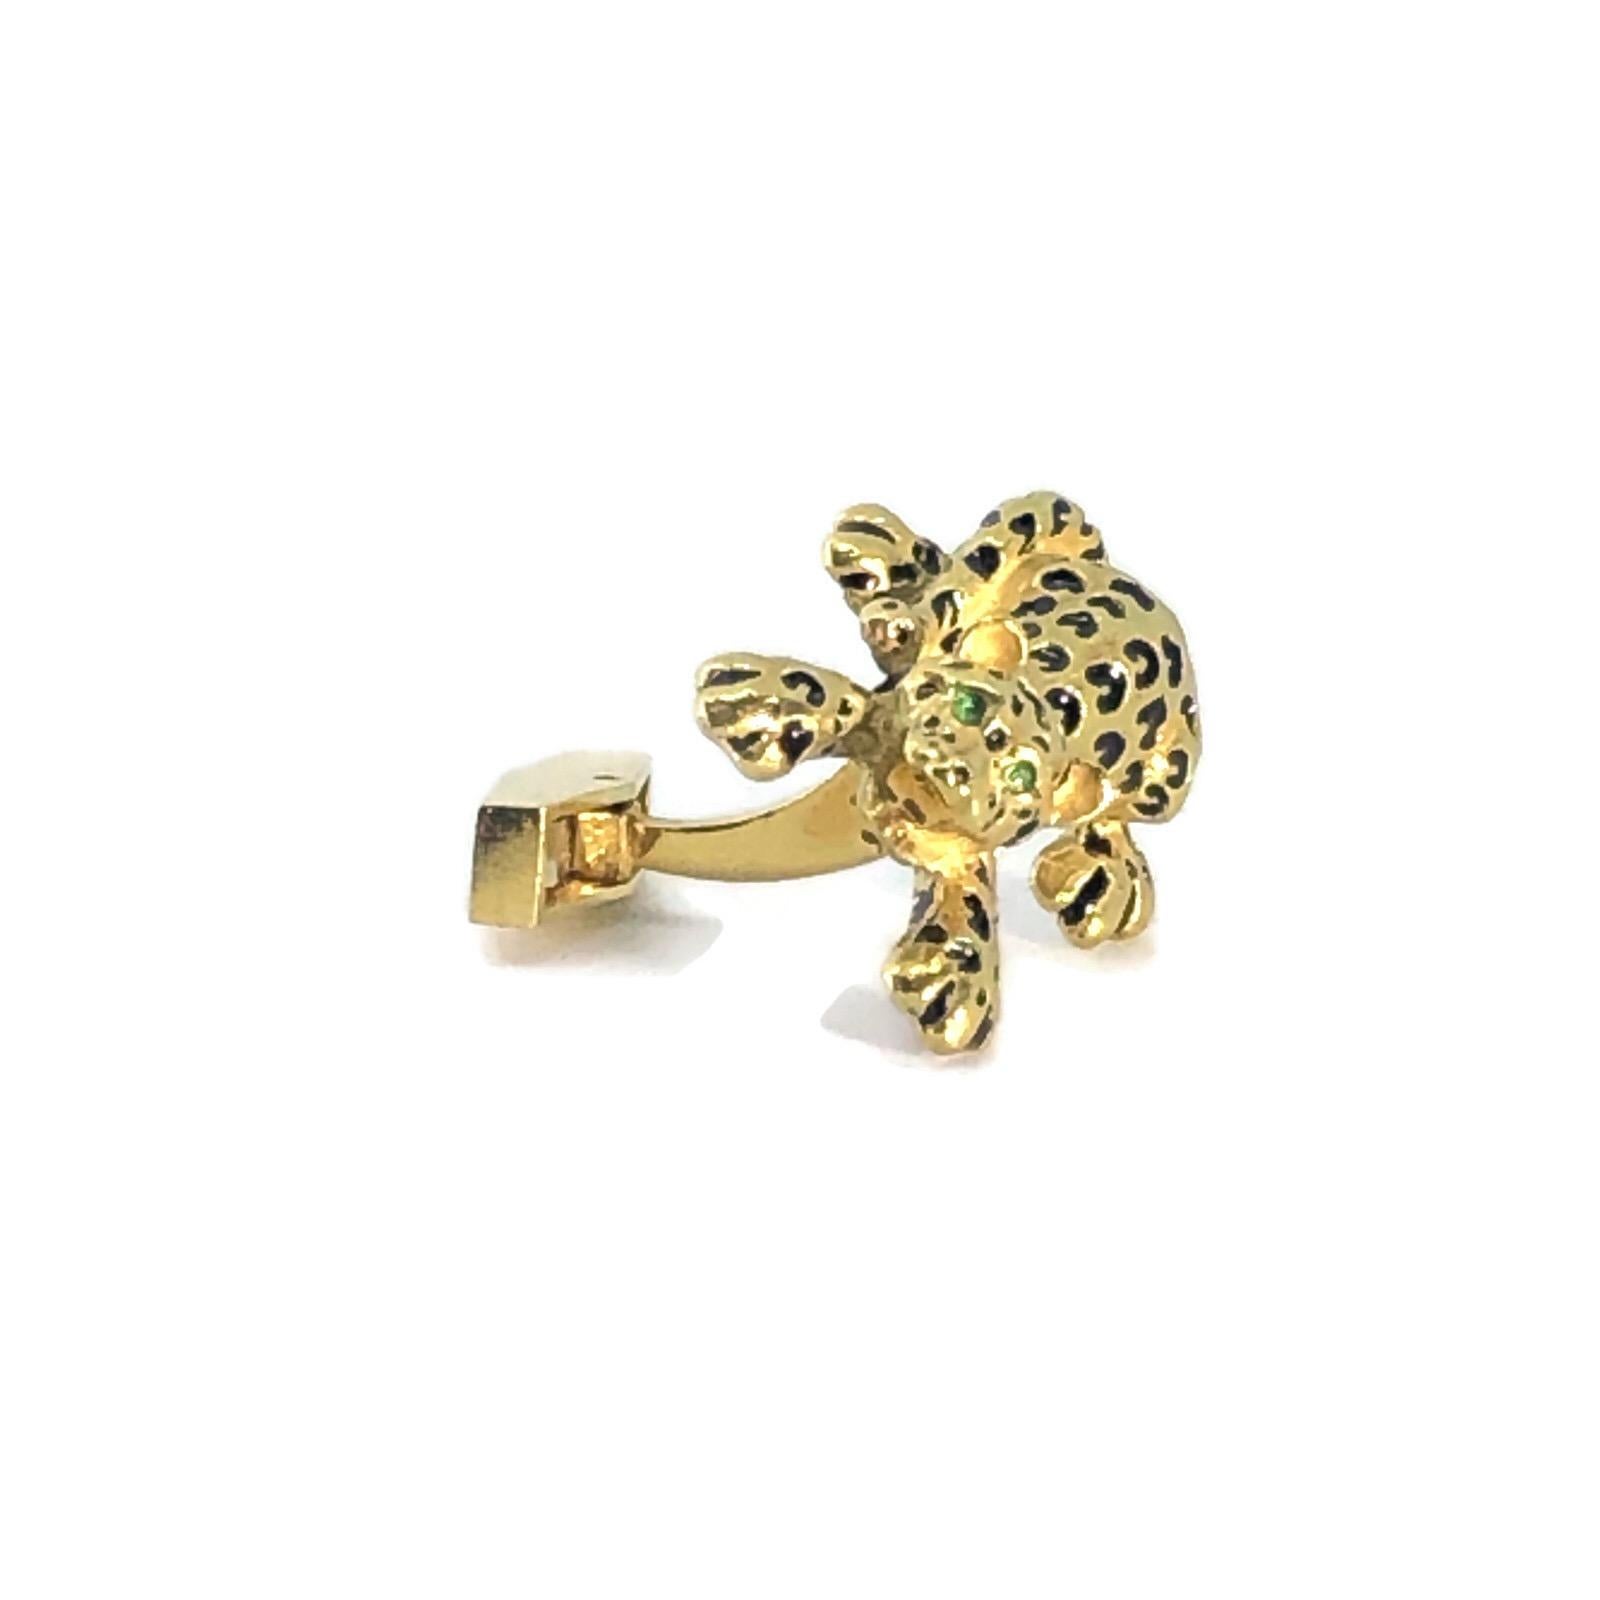 Round Cut Vintage Unisex Cufflinks of Tigers Made In Italy  In 18k Gold With Emerald Eyes For Sale